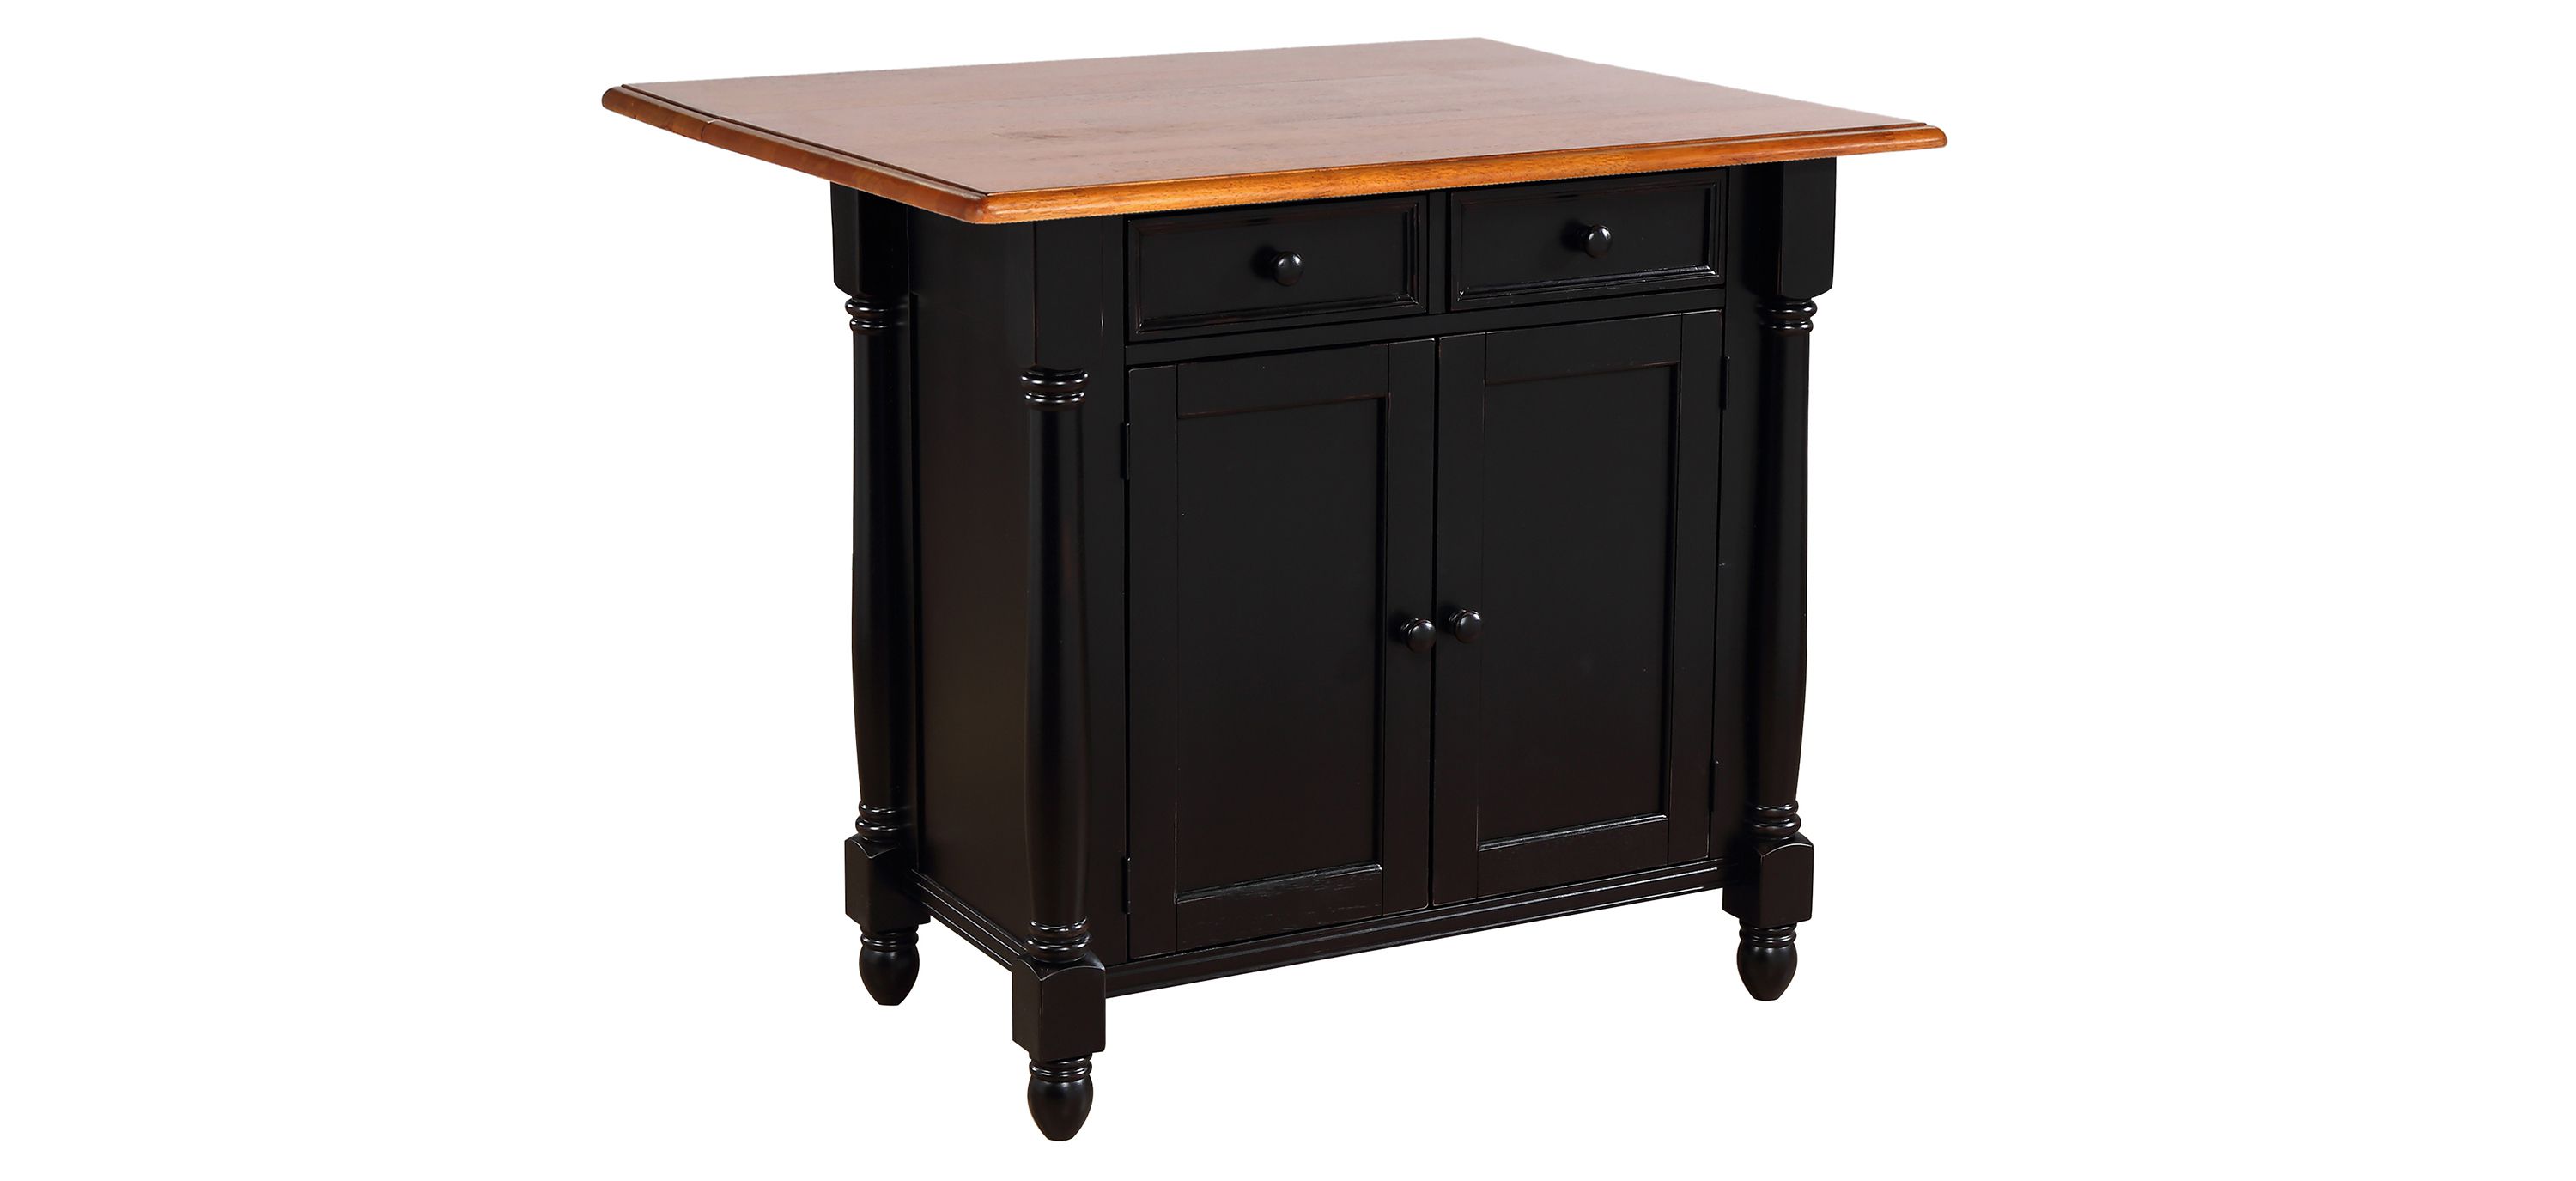 Black Cherry Selections Kitchen Island with Drop Leaf Top